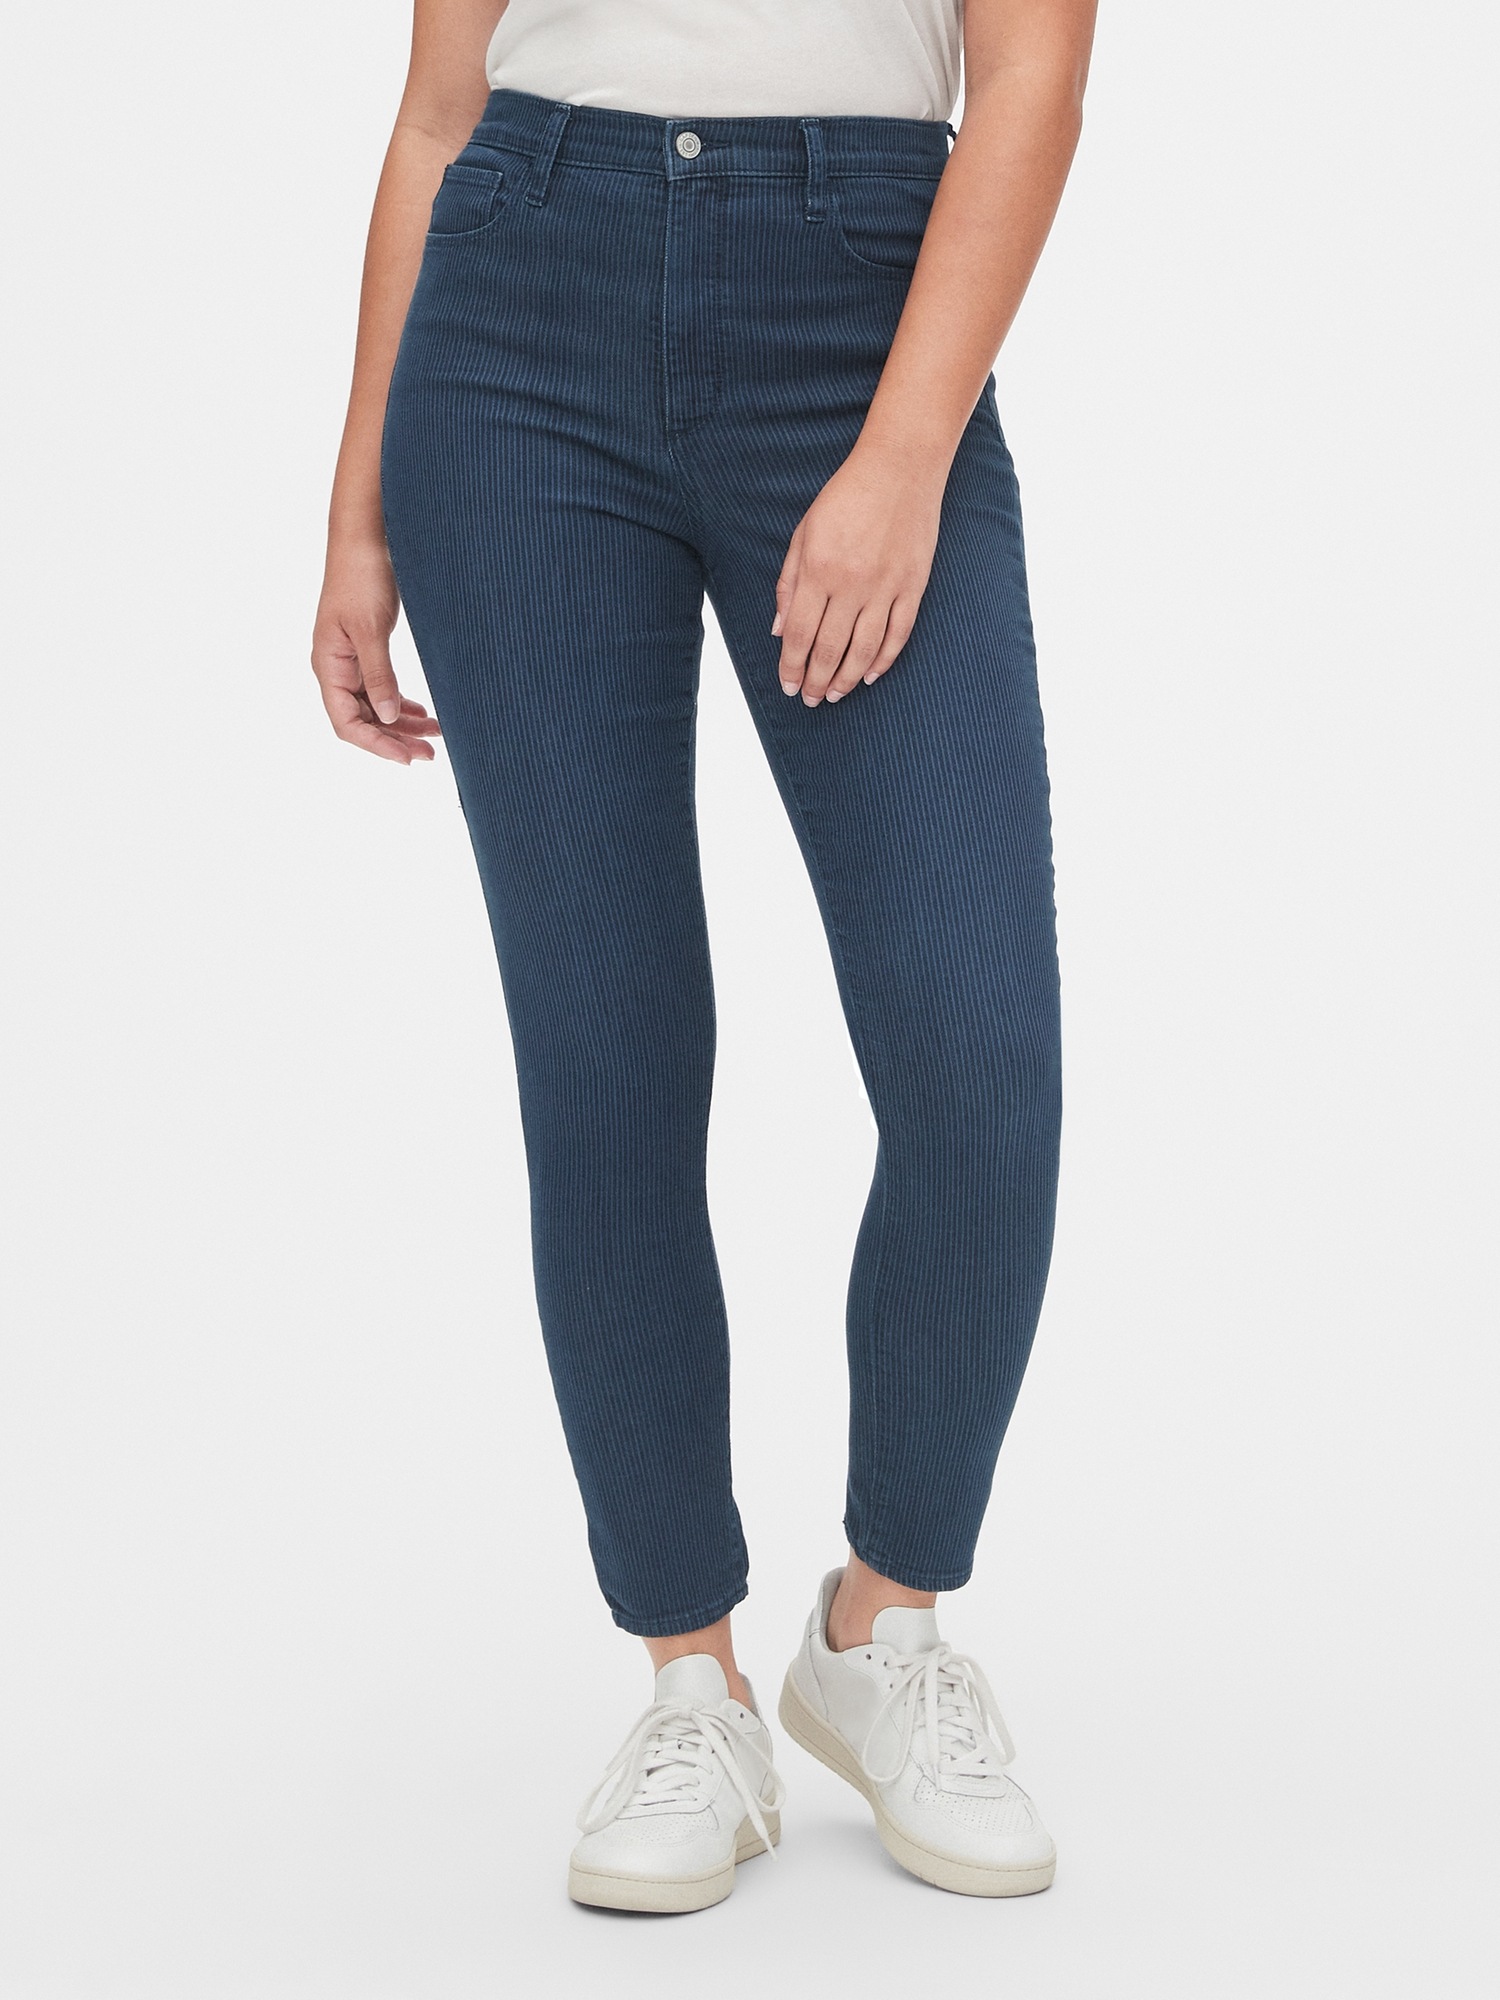 jeggings with front pockets